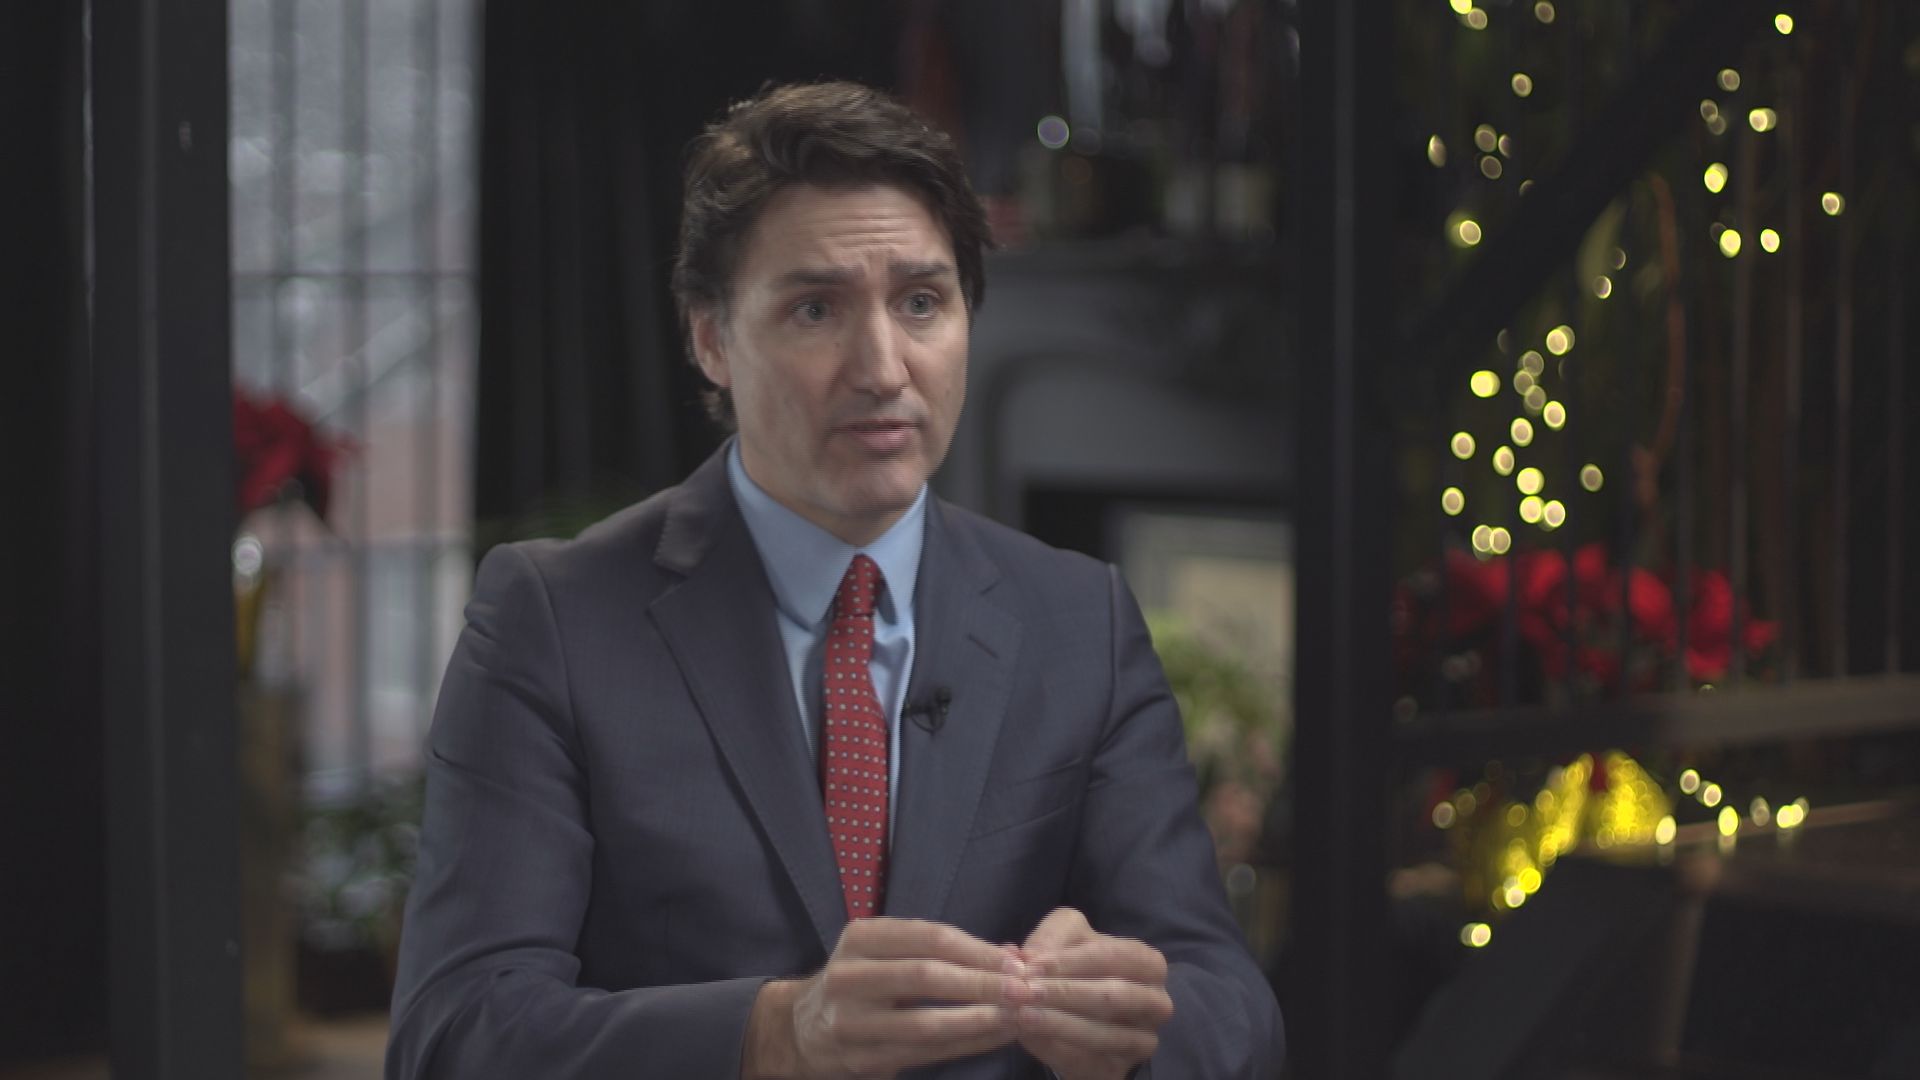 Trudeau says people are frustrated, but now is time for ‘doubling down’